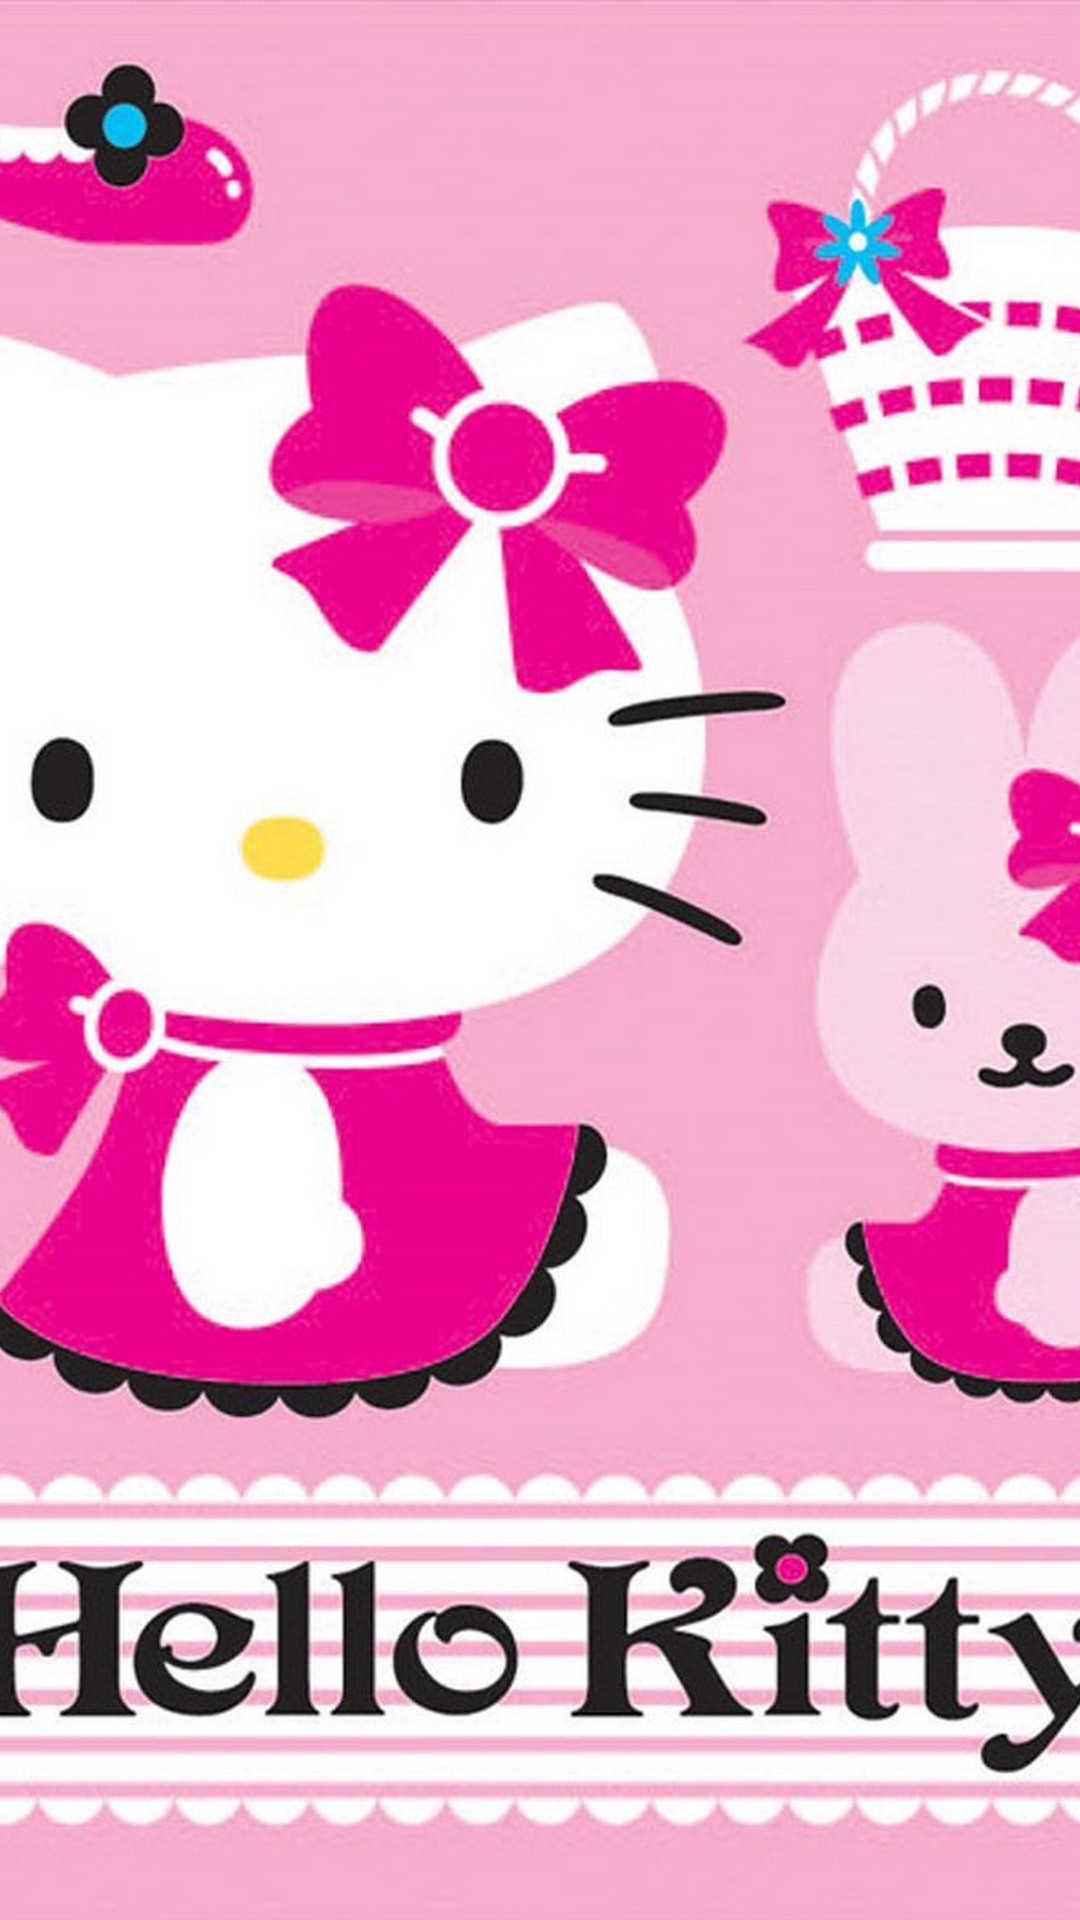 Wallpaper Hello Kitty Android with resolution 1080X1920 pixel. You can make this wallpaper for your Android backgrounds, Tablet, Smartphones Screensavers and Mobile Phone Lock Screen